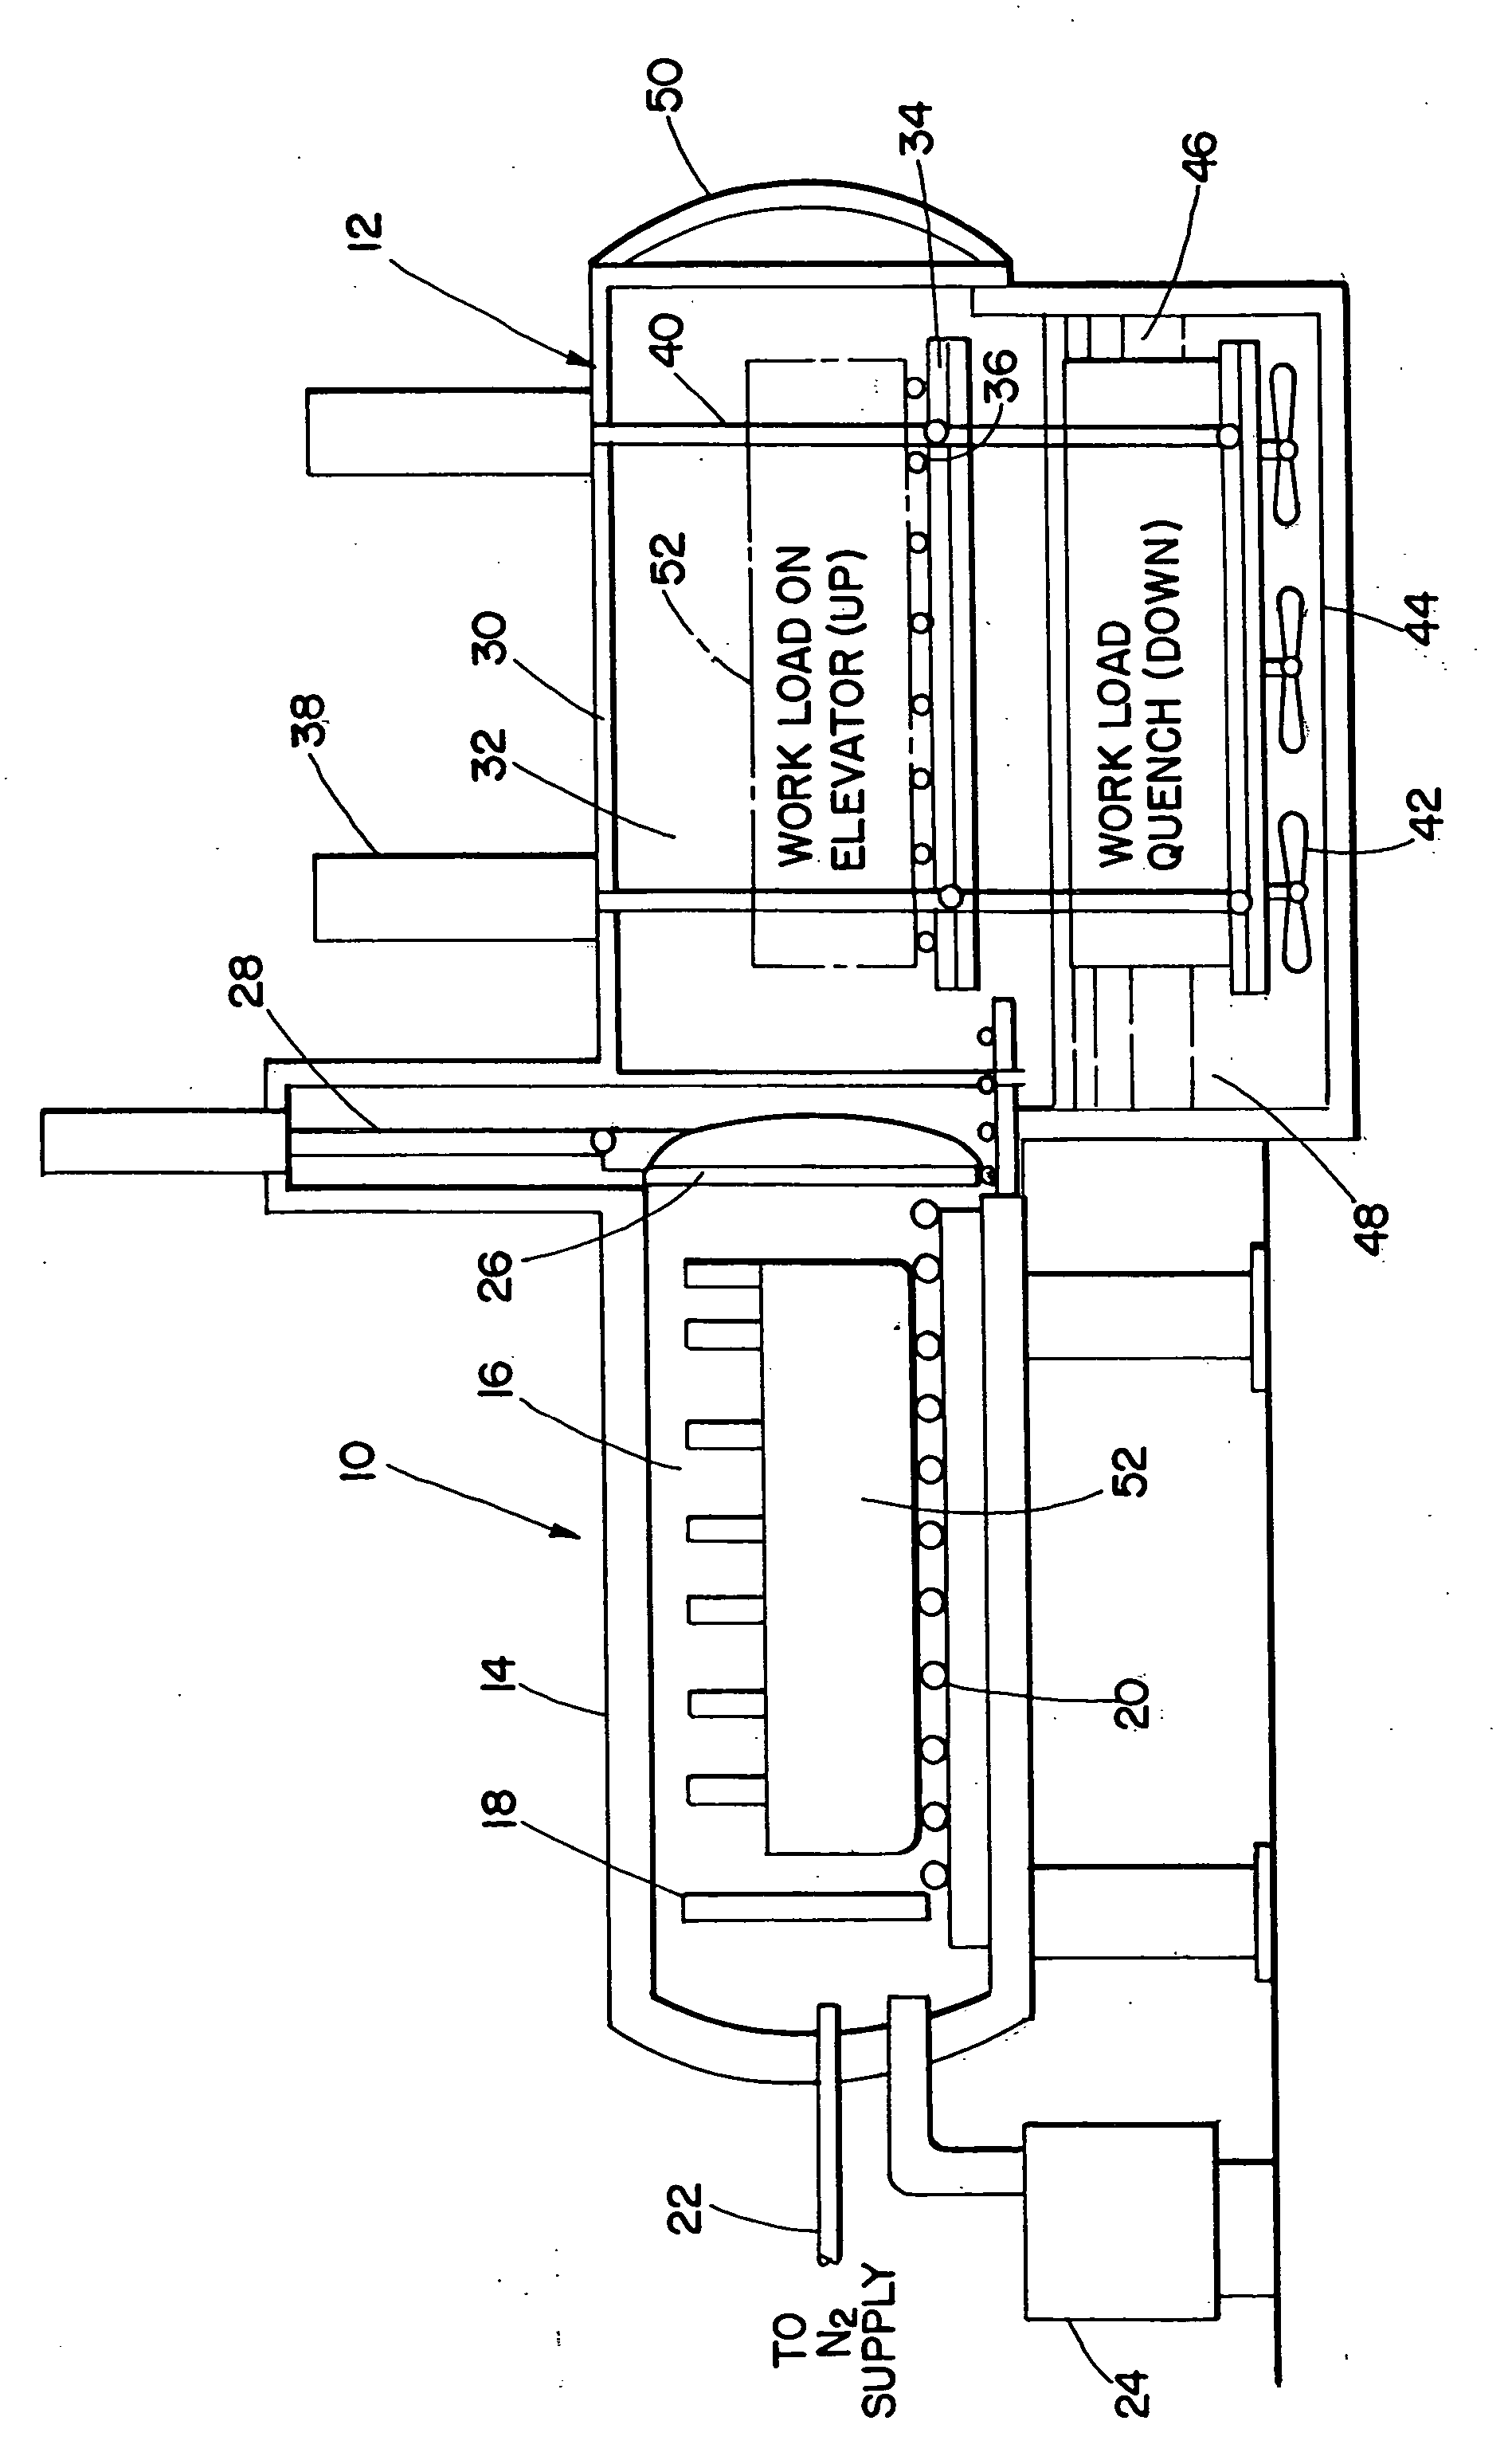 Vacuum furnace with pressurized intensive water quench tank